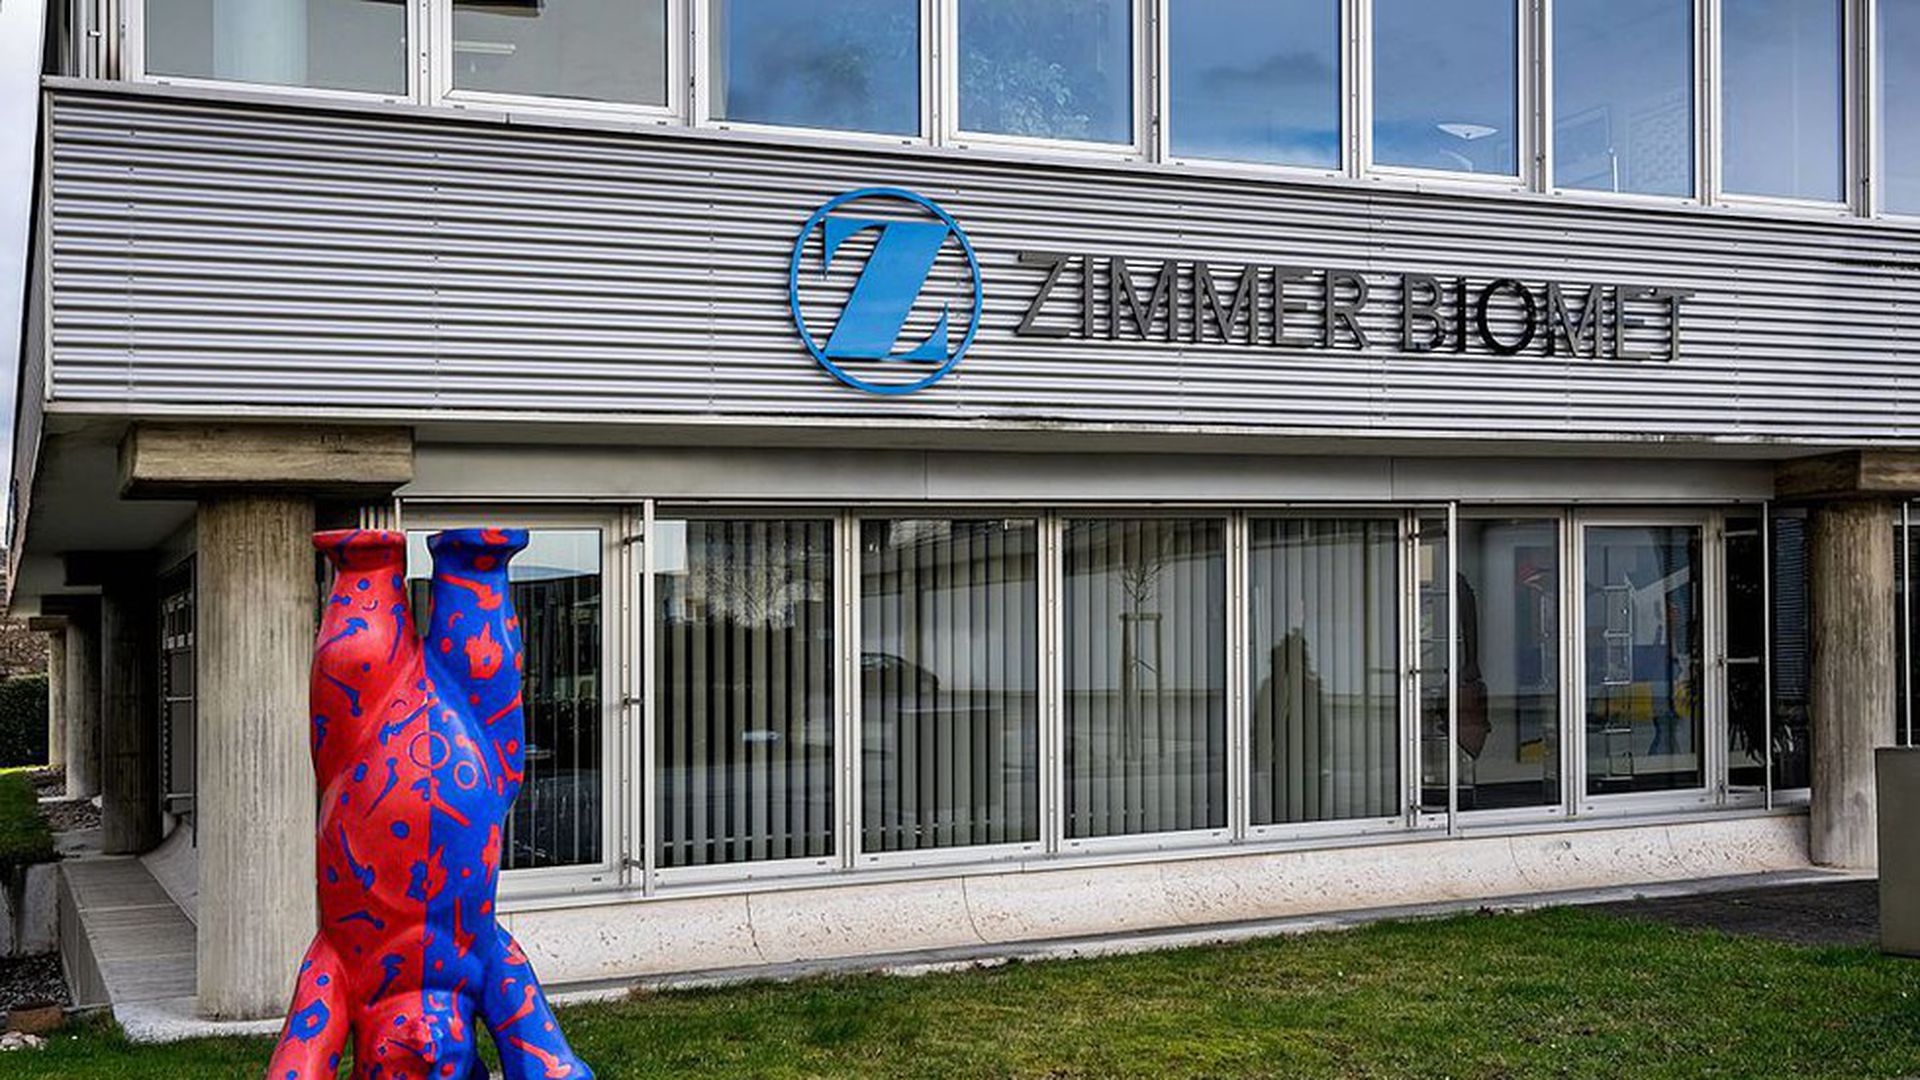 Zimmer Biomet S Ceo Resigns Unexpectedly Axios